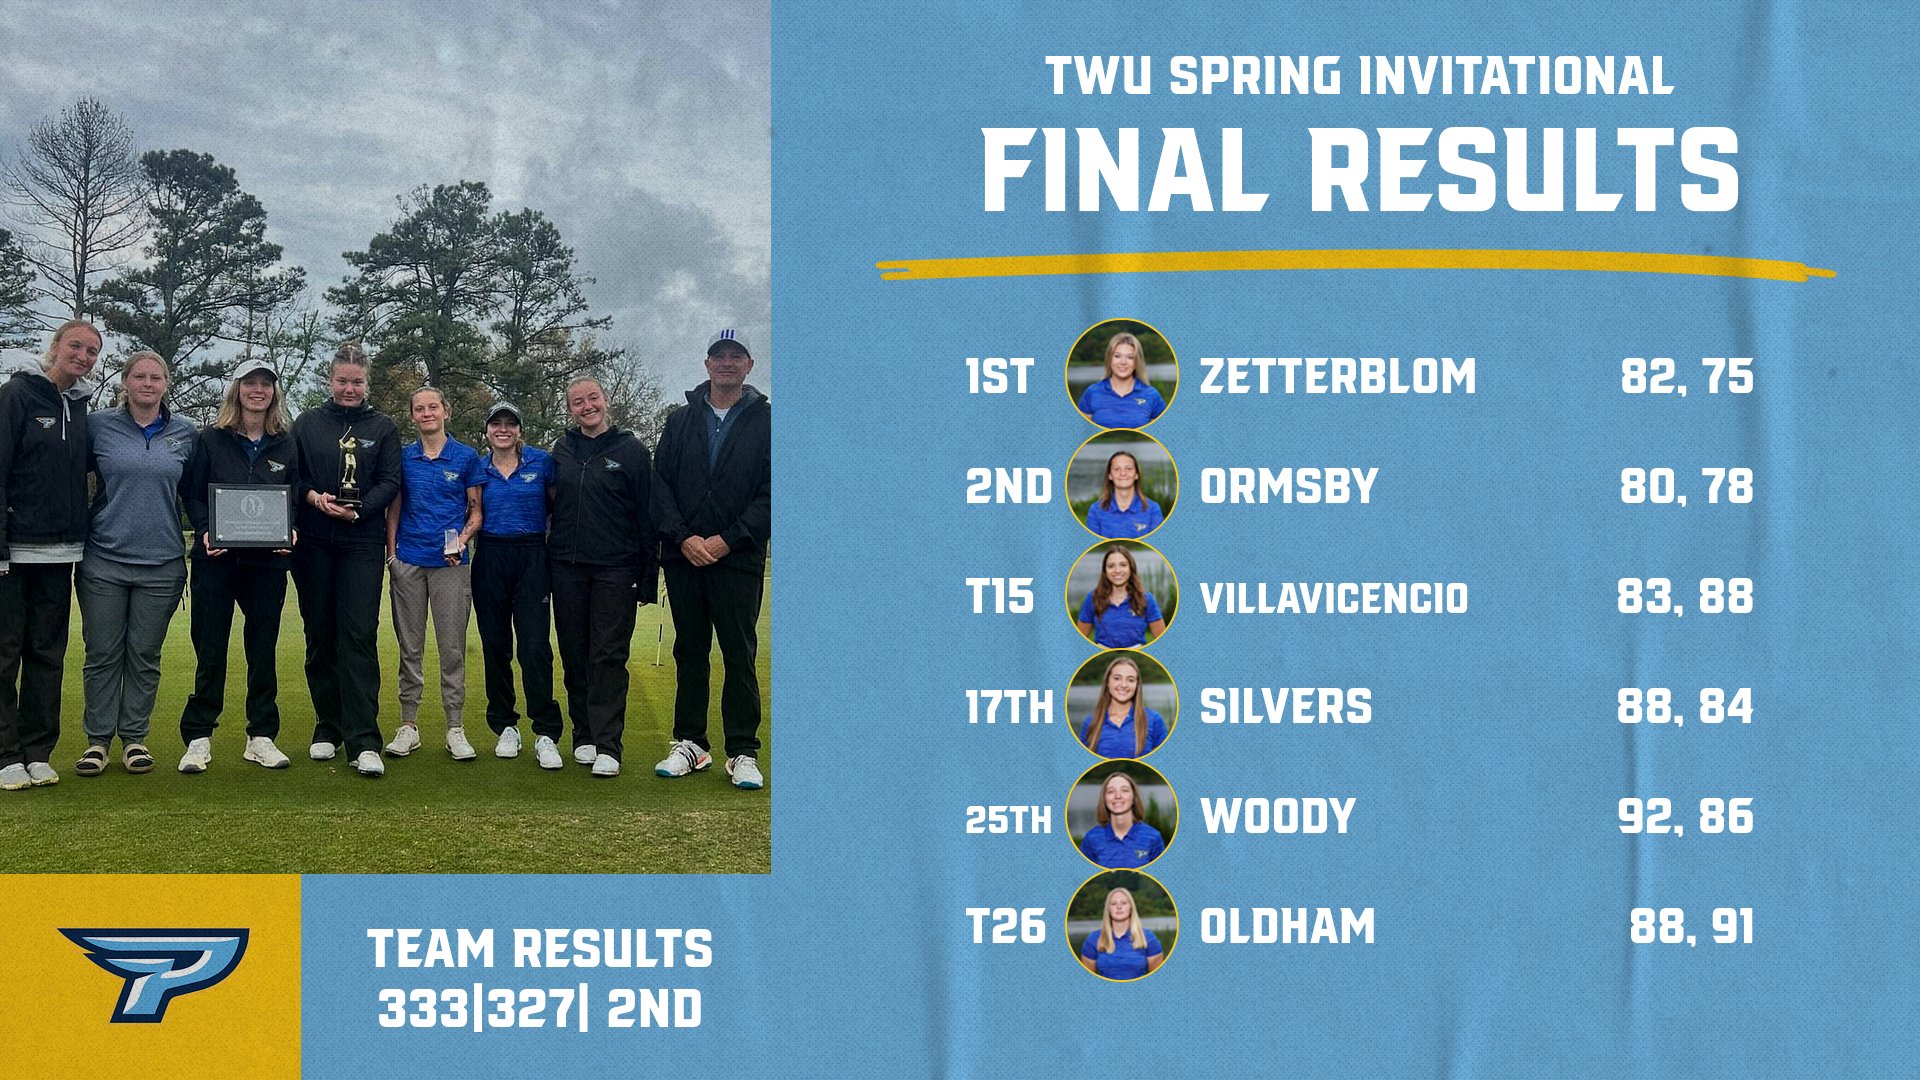 Women’s Golf prevails for a 2nd Place Finish at the TWU Spring Invitational